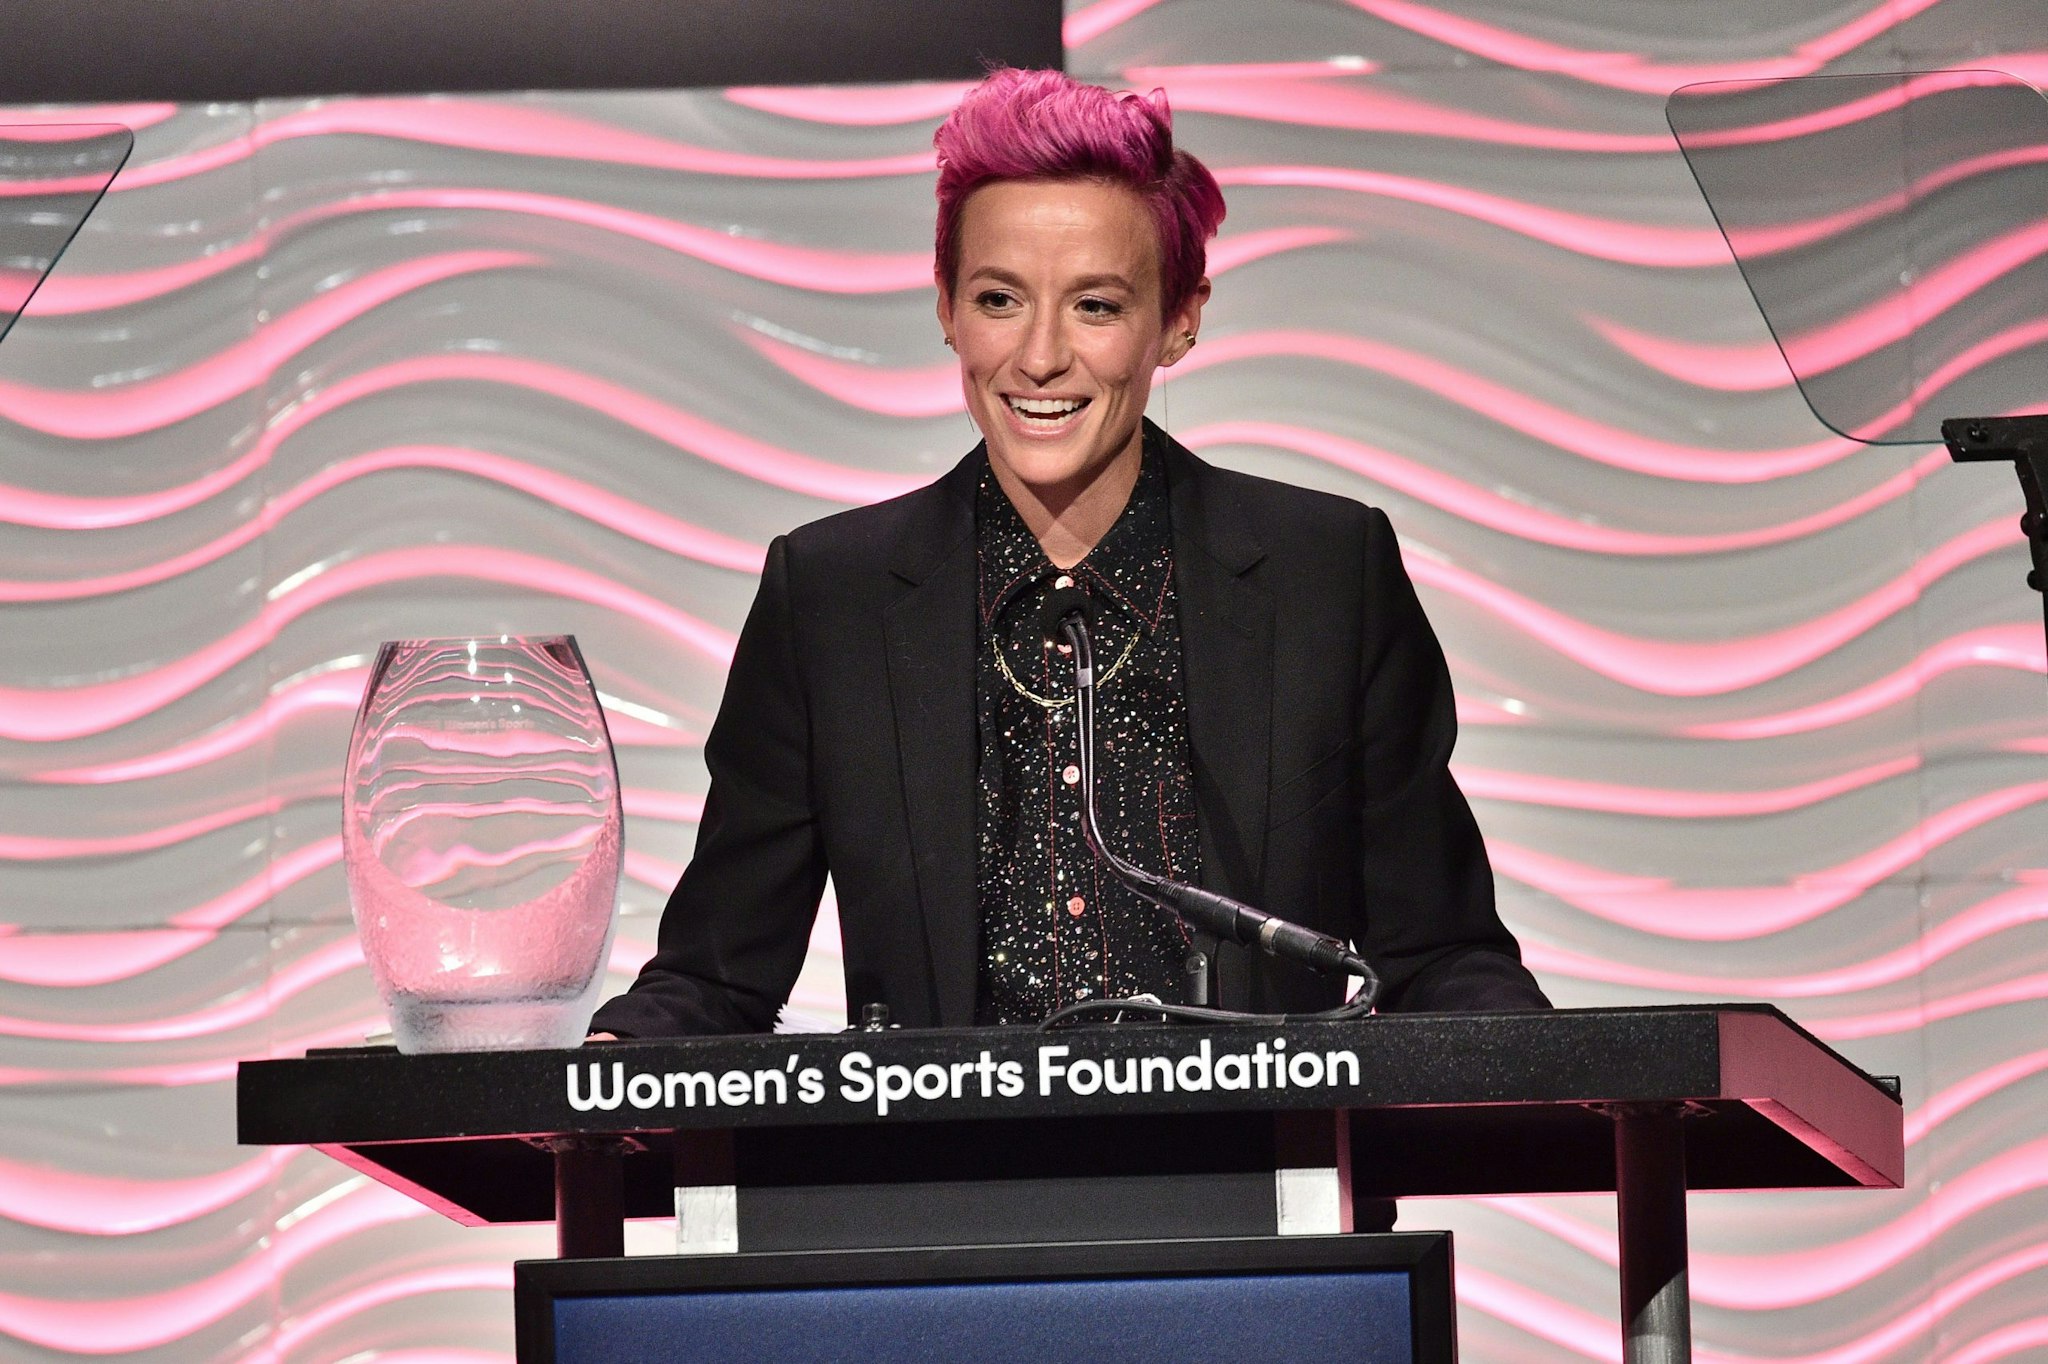 NEW YORK, NEW YORK - OCTOBER 16: Megan Rapinoe accepts her WSF Sportswoman Of The Year Award (Team Sport) at The Women in Sports Foundation 40th Annual Salute to Women in Sports Awards Gala, celebrating the most accomplished women in sports and the girls they inspire at Cipriani Wall Street on October 16, 2019 in New York City. (Photo by Theo Wargo/Getty Images for Women In Sports Foundation)